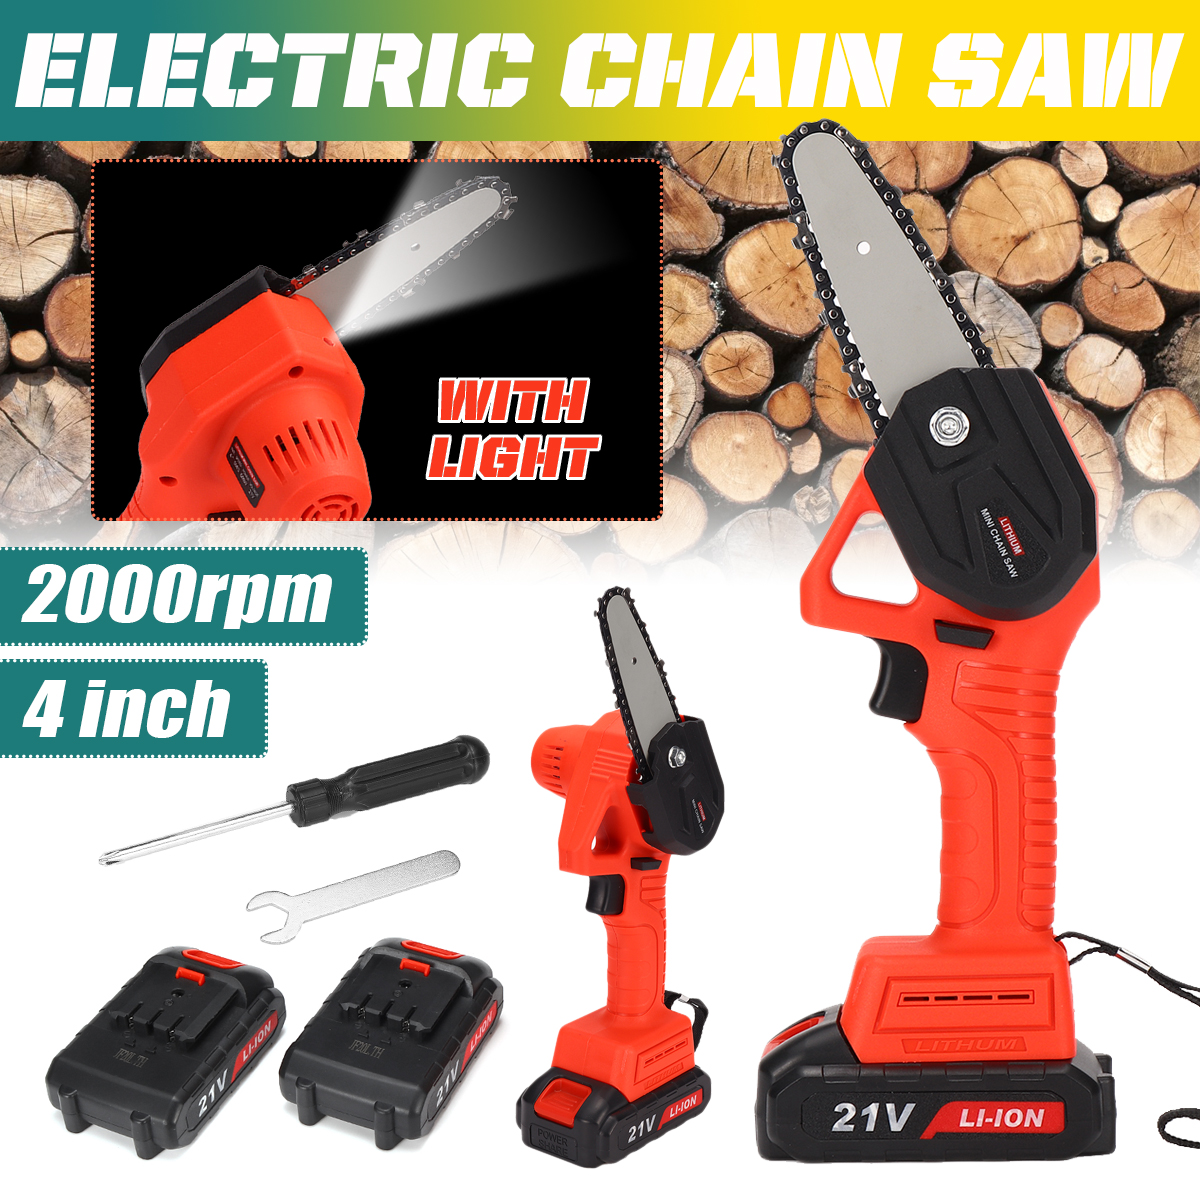 600W-4Inch-Cordless-Electric-Chain-Saw-Wood-Cutter-Tools-Garden-Woodwork-W-1pc-or-2pcs-Battery-1801758-1